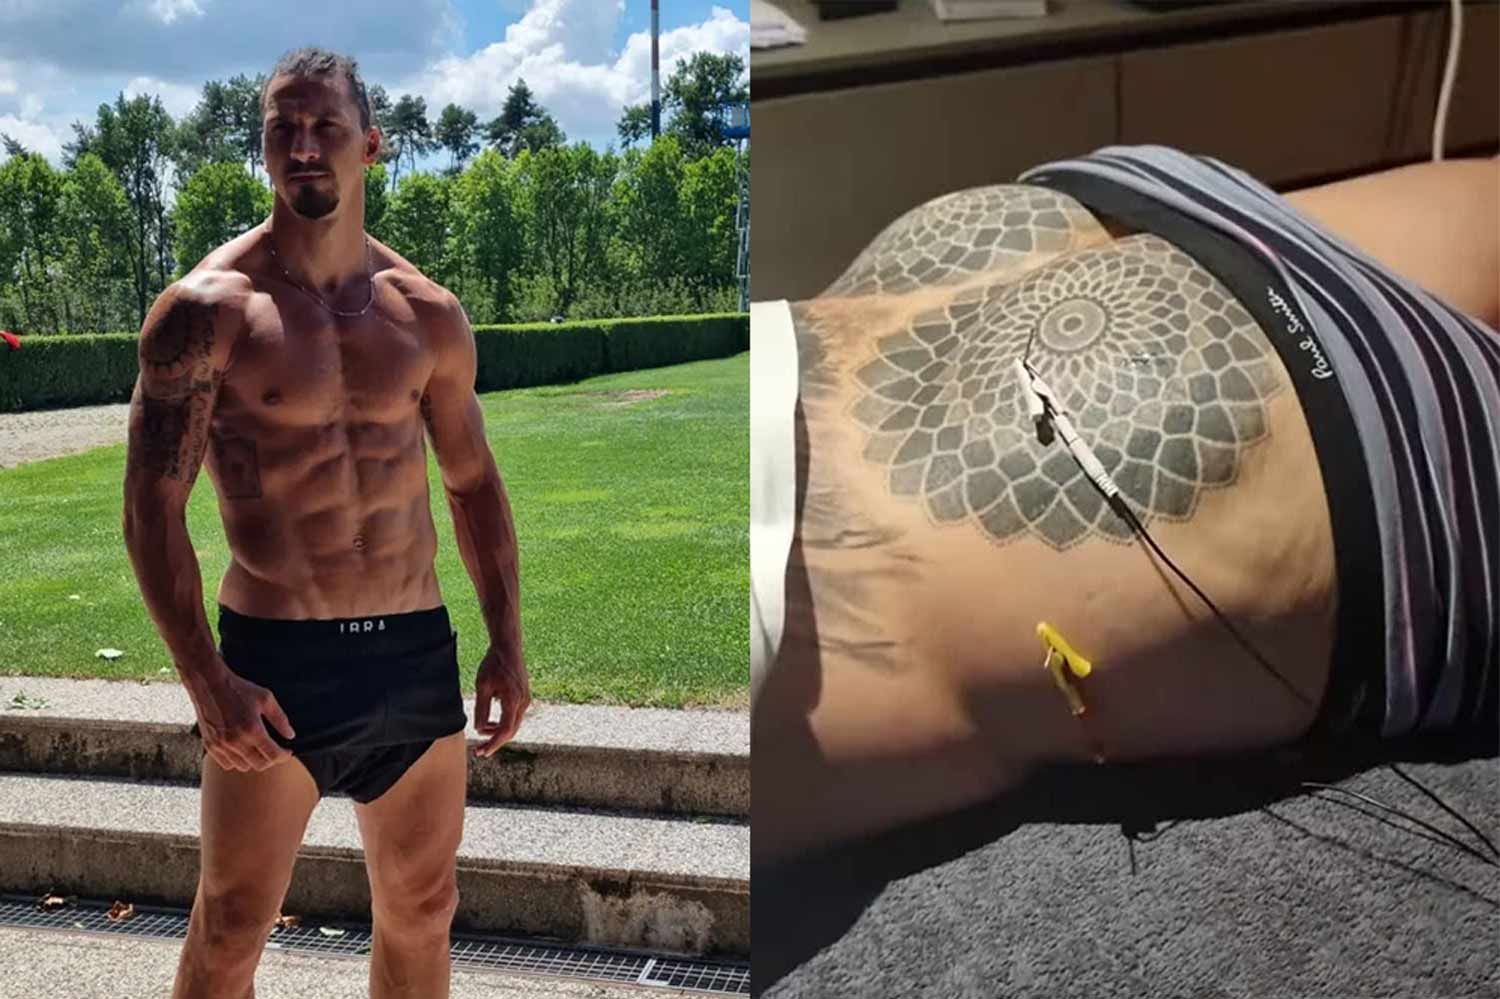 Zlatan Ibrahimovic Reveals The Secret To His Famous ‘Buns Of Steel’